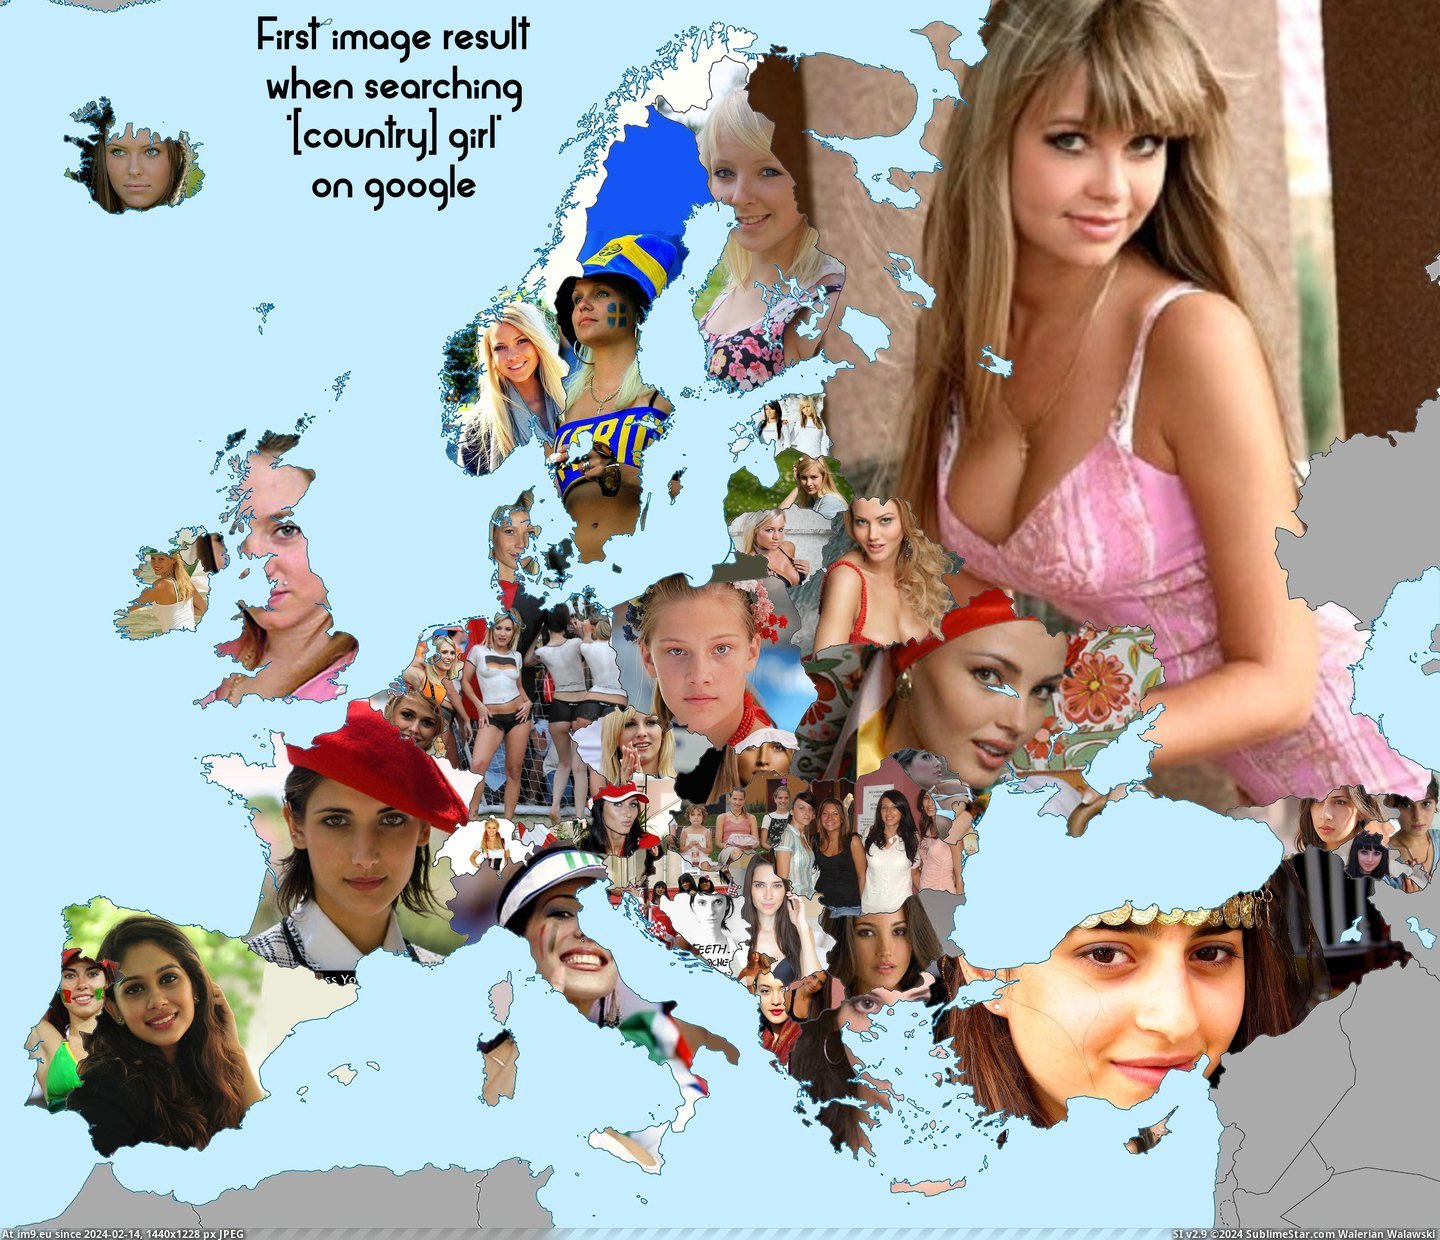 #Image #Girl #Country #Result #Searching #Map #Europe [Mapporn] Europe map with the first image result when searching '[country] girl]' [OC] [5000x4275] Pic. (Image of album My r/MAPS favs))